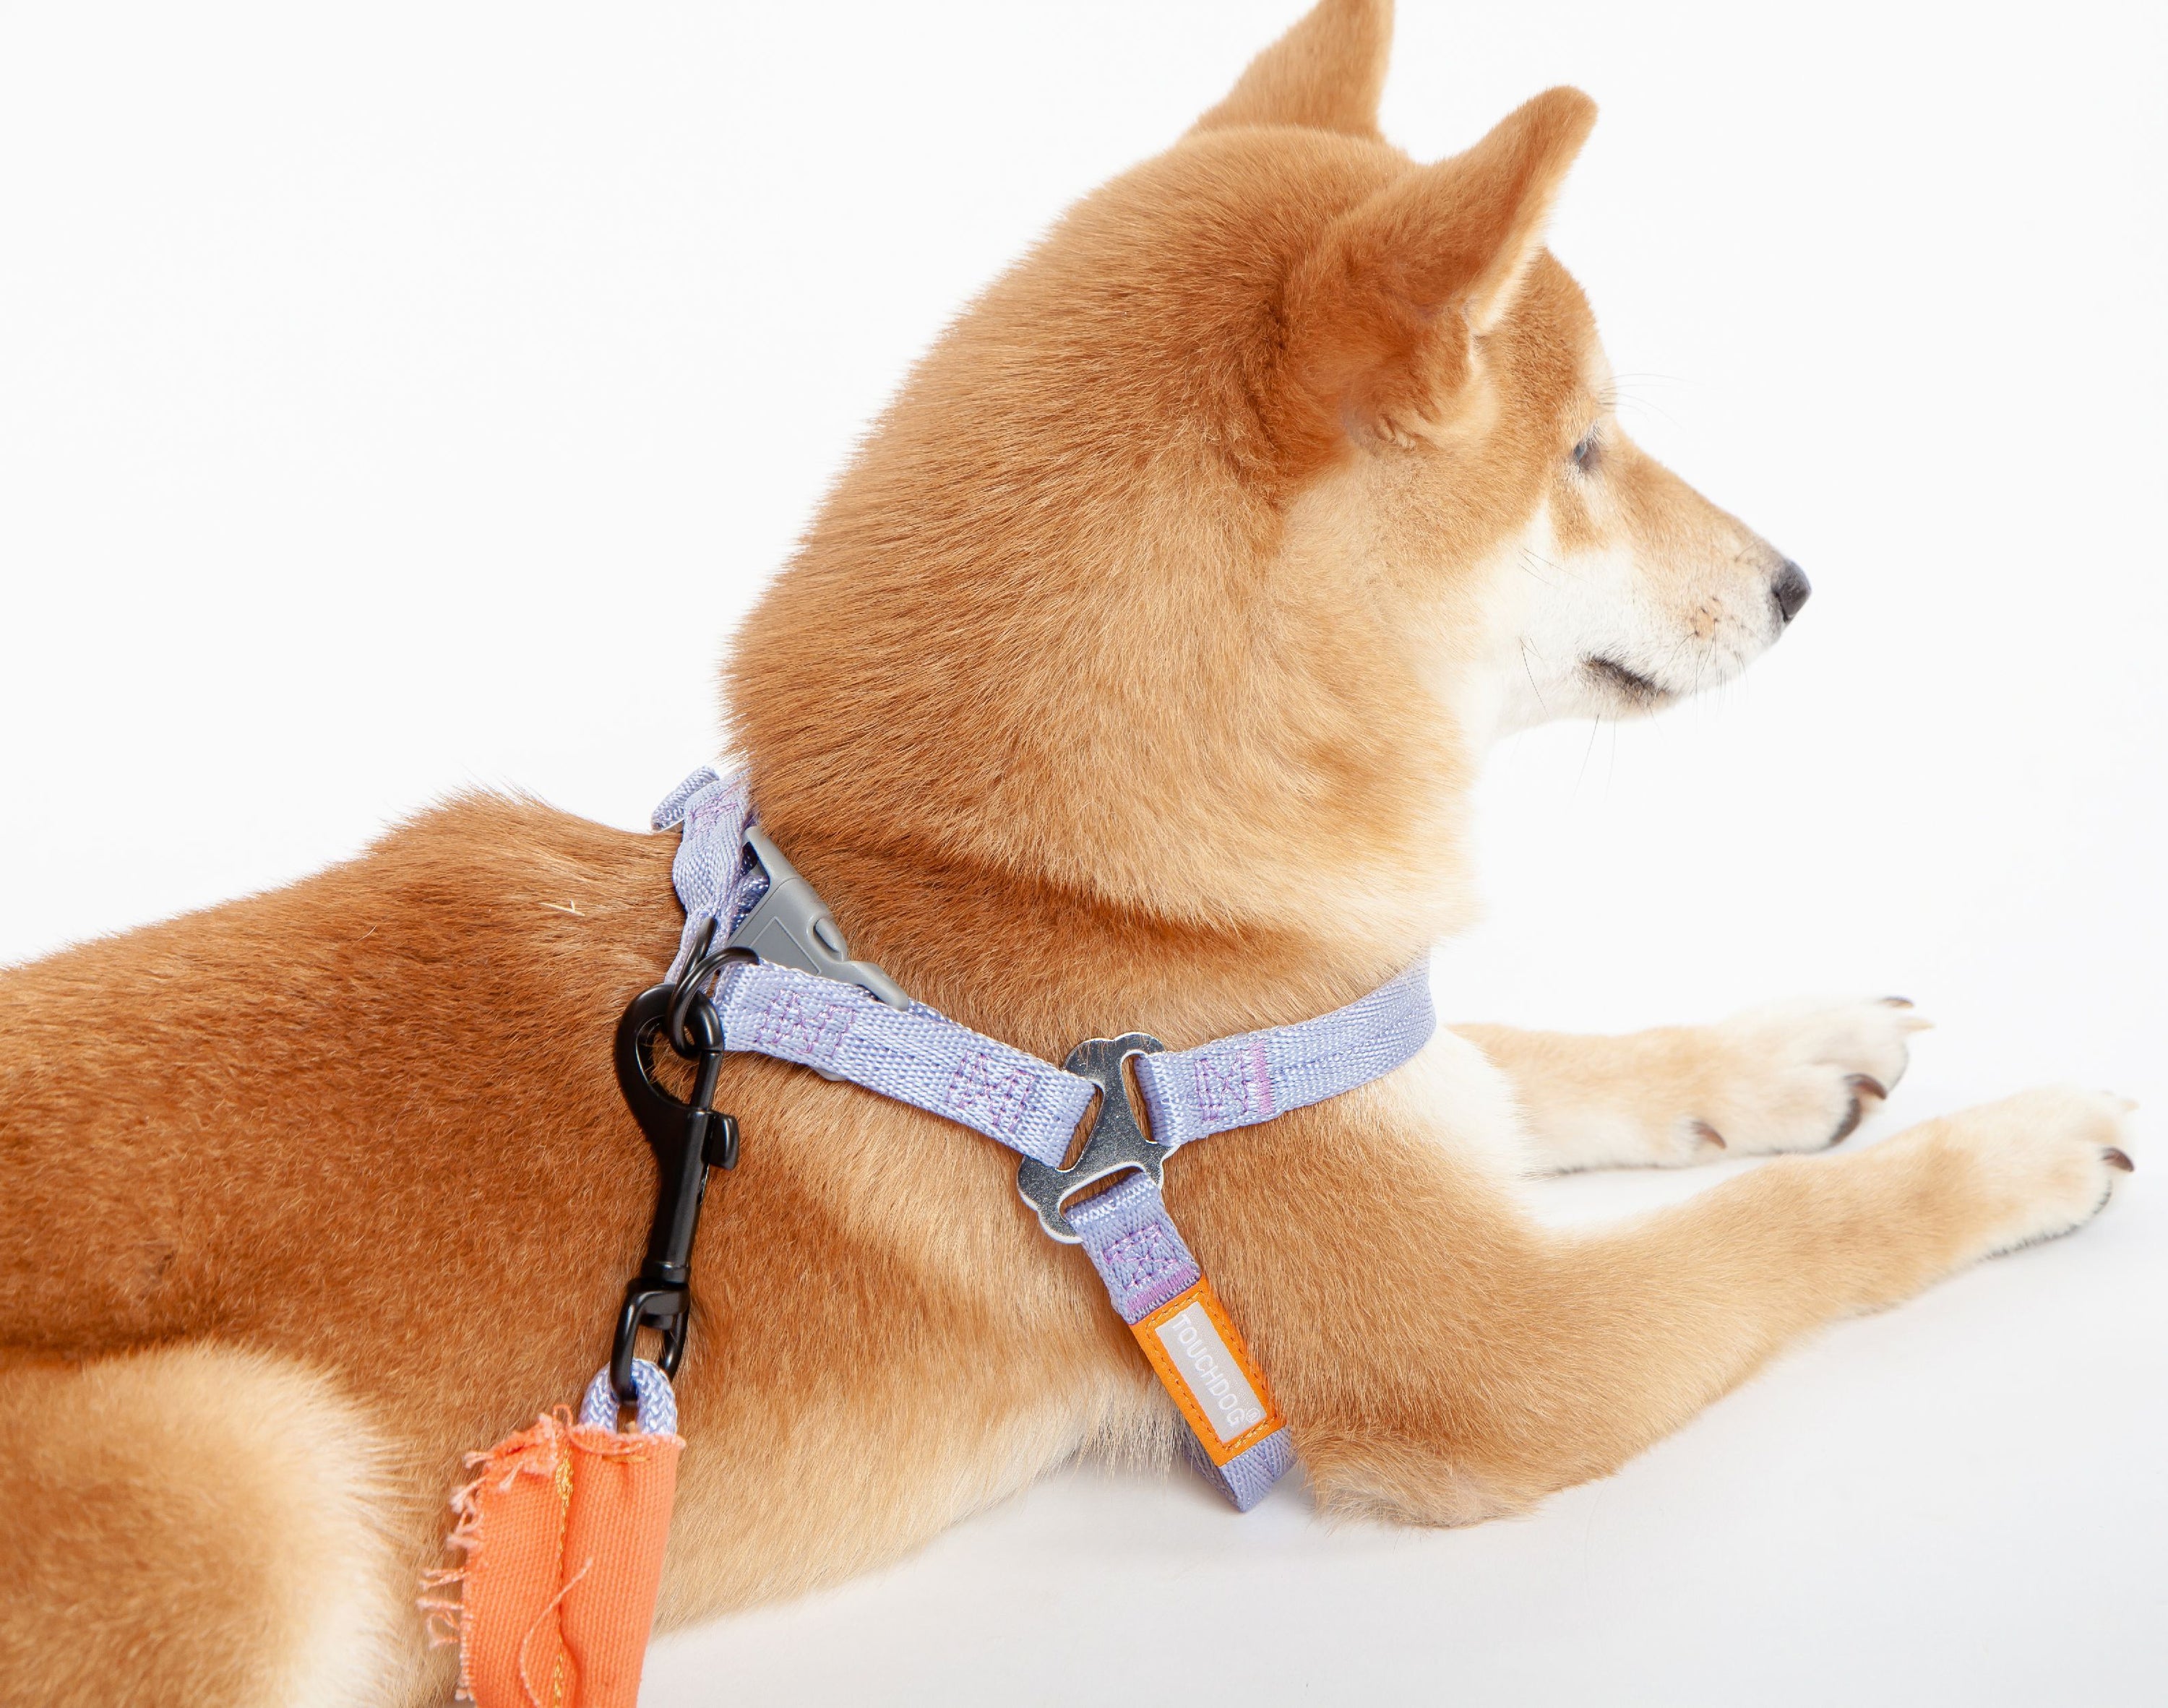 Touchdog ® 'Macaron' 2-in-1 Durable Nylon Dog Harness and Leash  